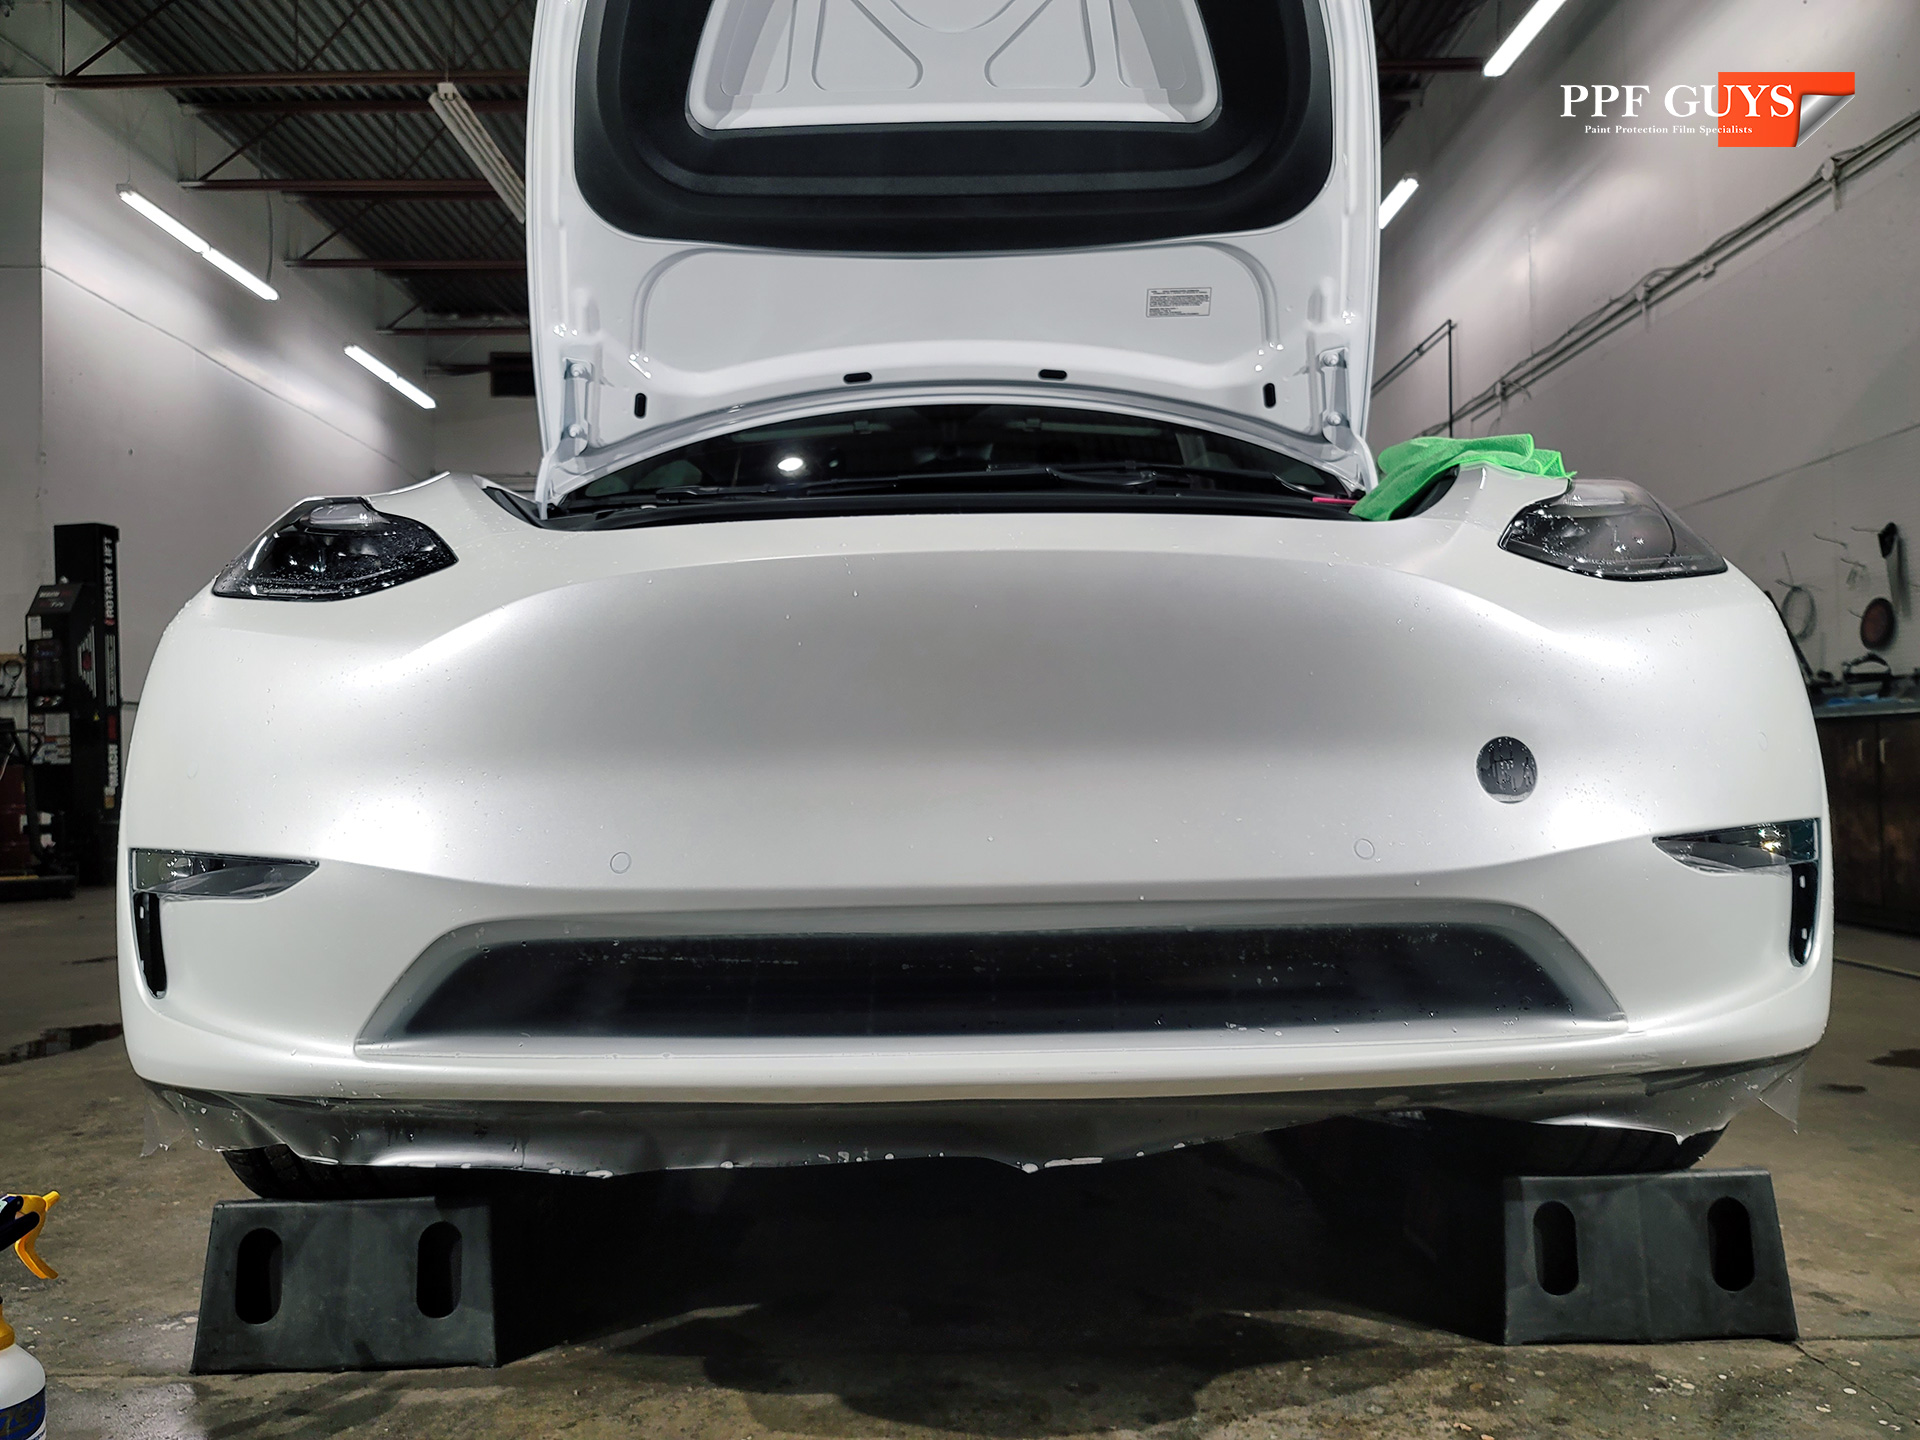 PPF Guys Model Y White Xpel Stealth, ceramic, painted emblems (2).jpg